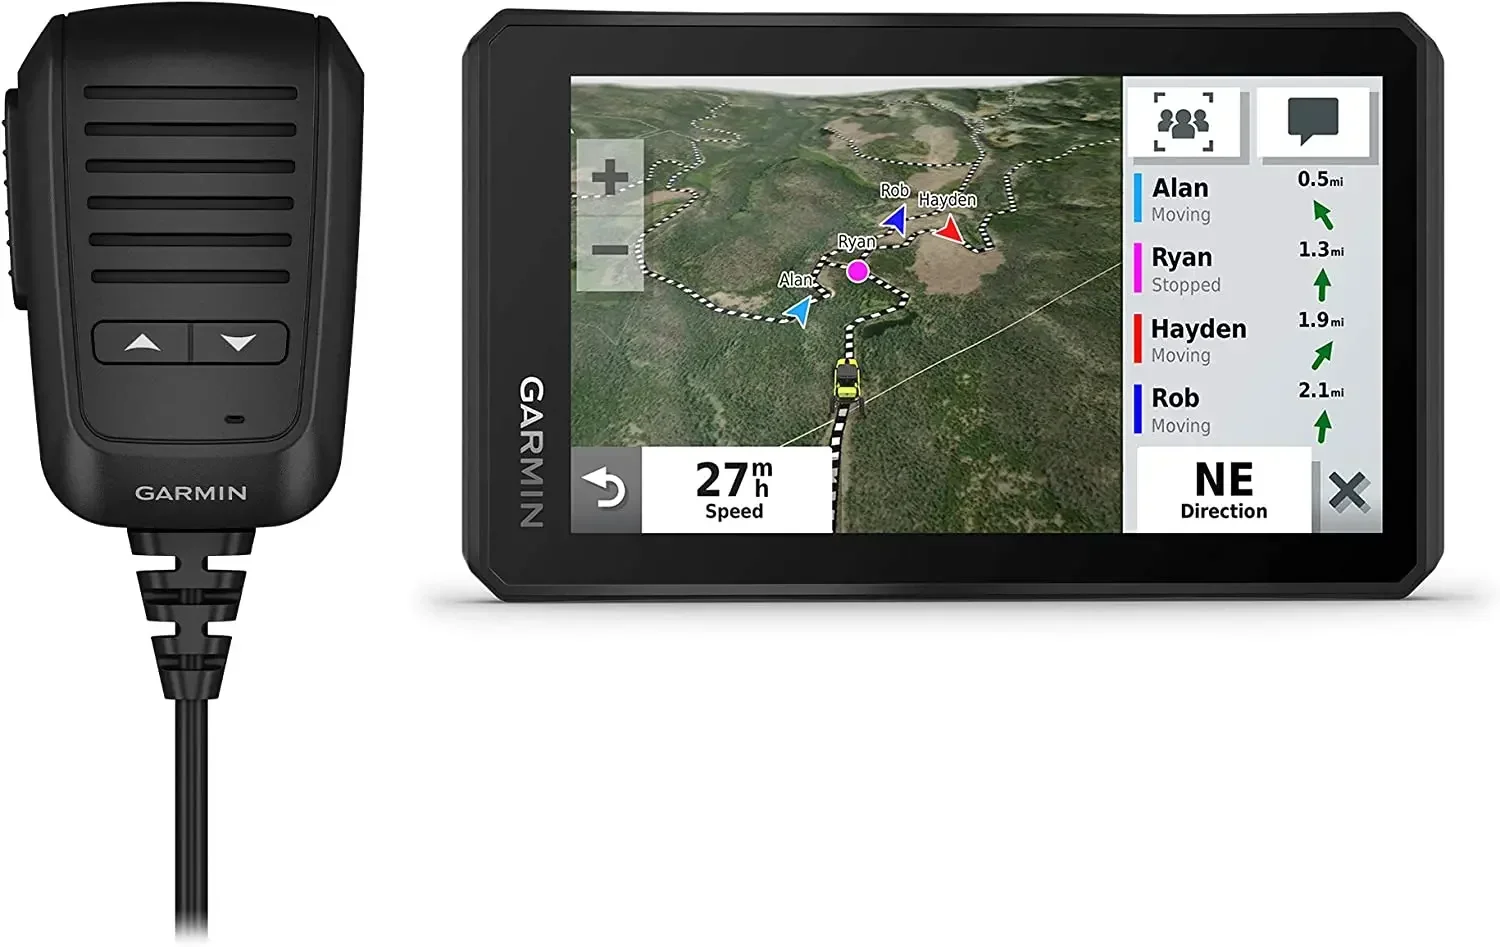 

HOT SPRING 50% DISCOUNT SALES Garmin Tread Powersport Off-Road Navigator With Group Ride Radio, Group Tracking And Voice Commun